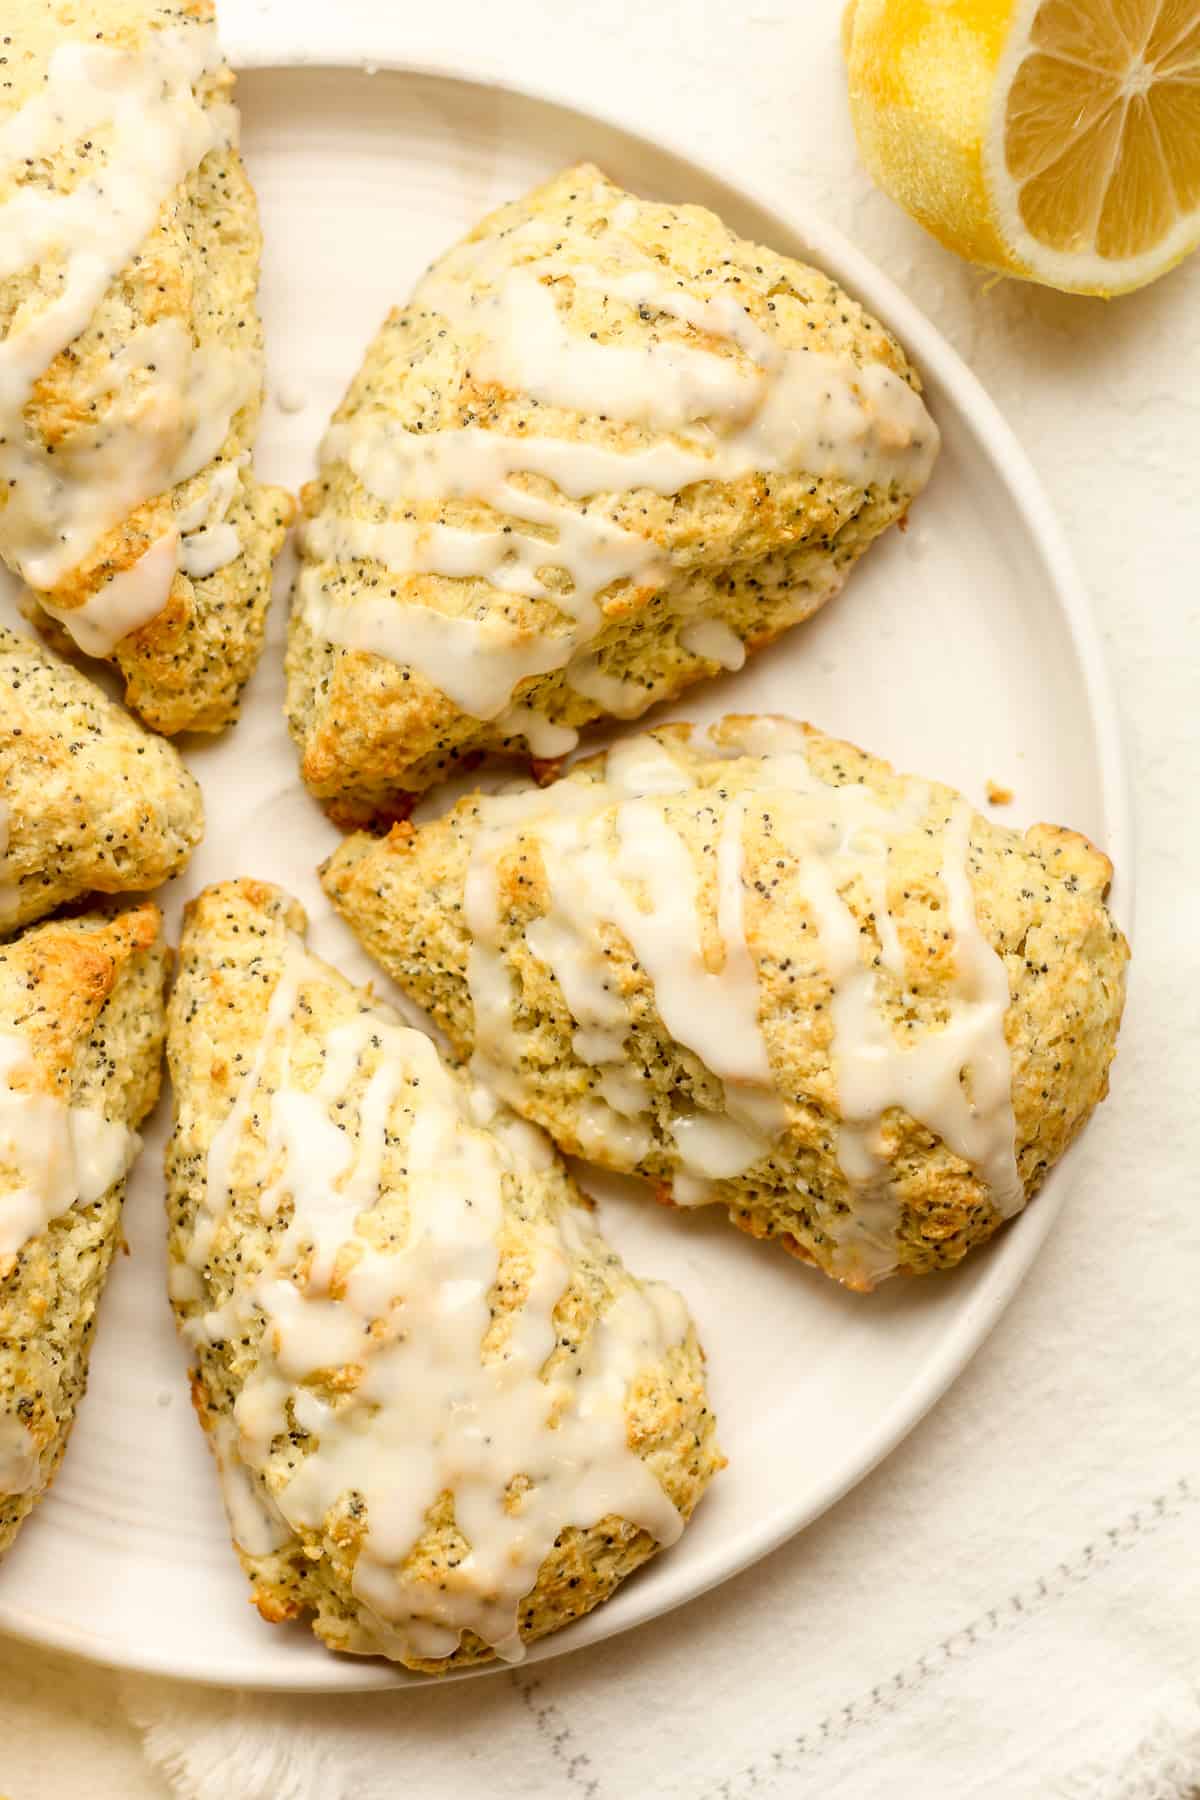 A plate of lemon scones with poppy seeds and glaze.